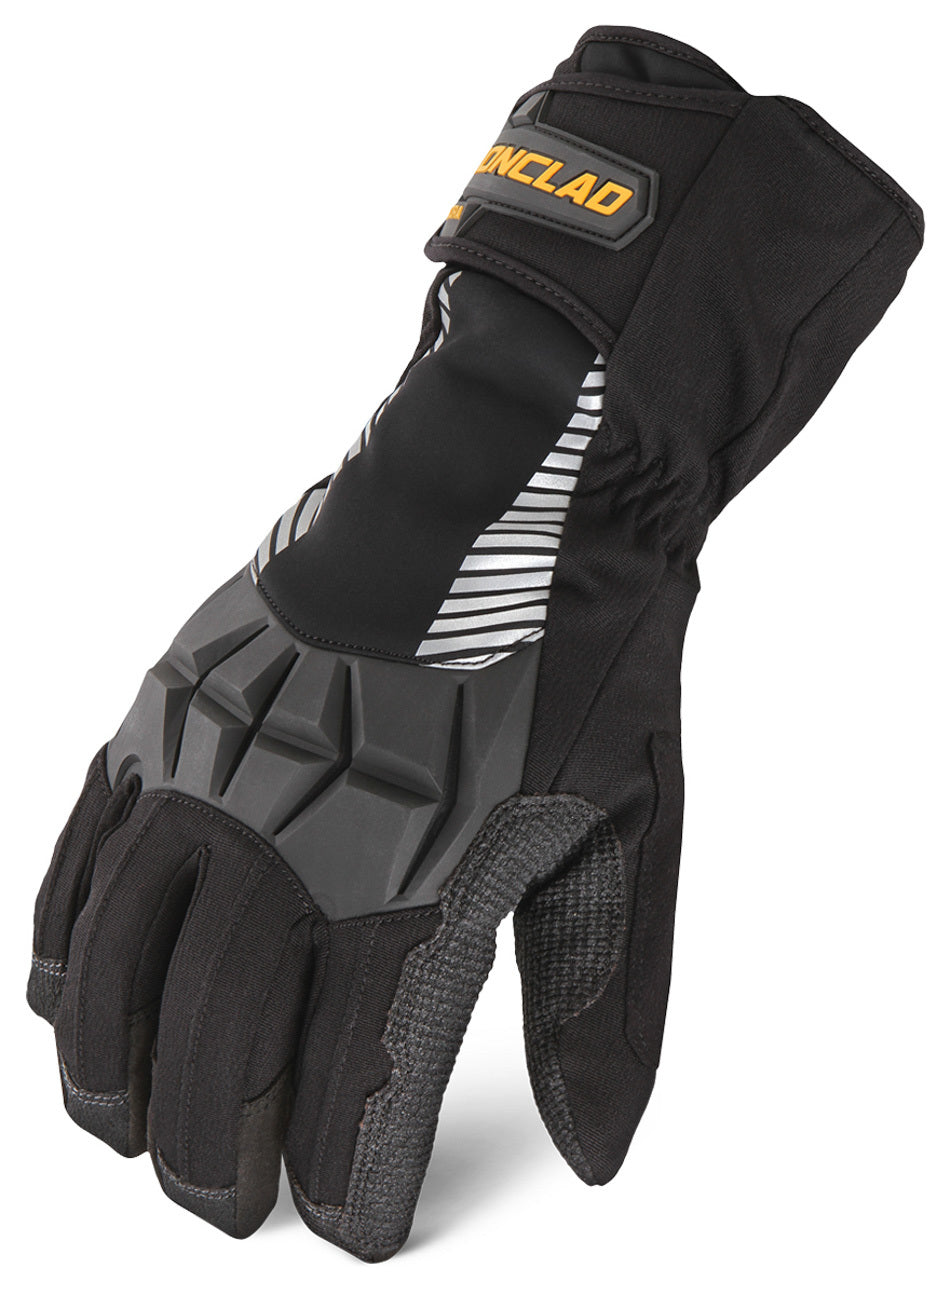 Cold Condition 2 Glove Tundra X-Large